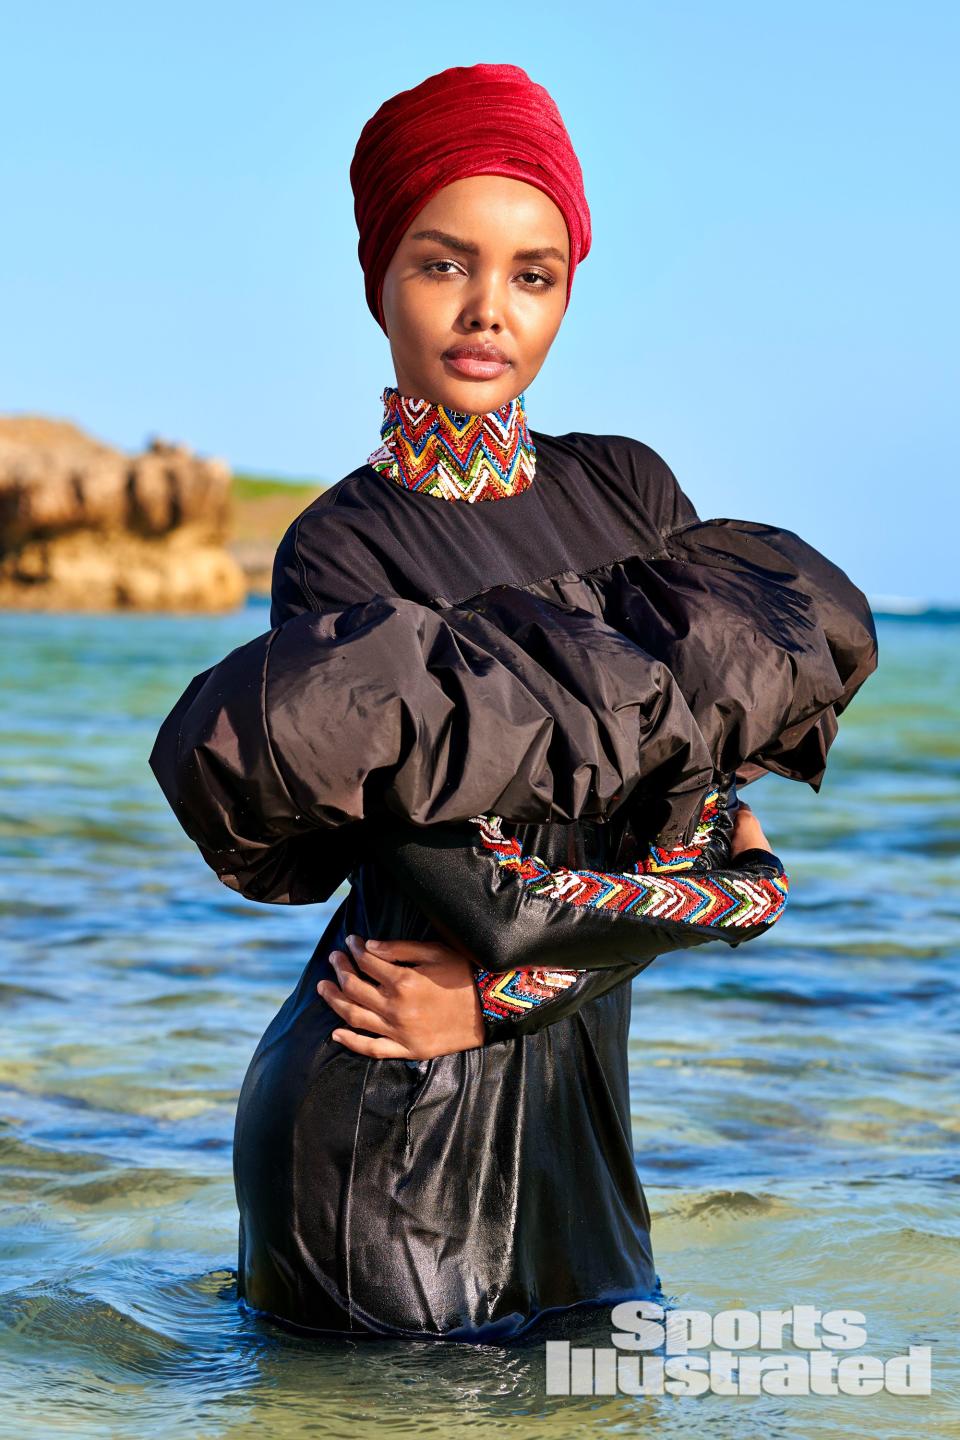 Halima-Aden-sports-illustrated-rookie-first-model-in-hijab